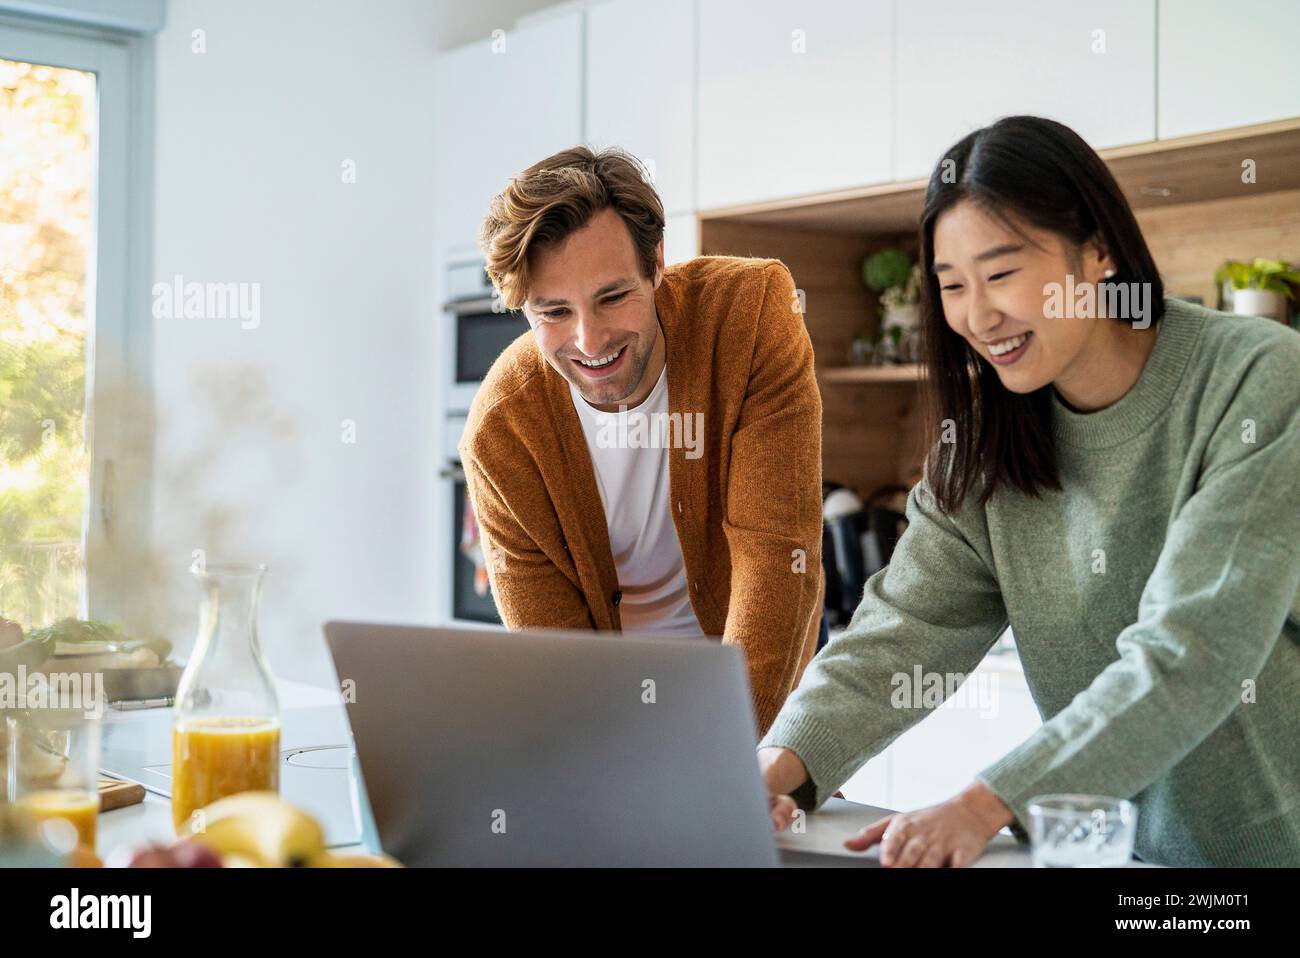 Adult couple shopping online on laptop while leaning on kitchen counter Stock Photo